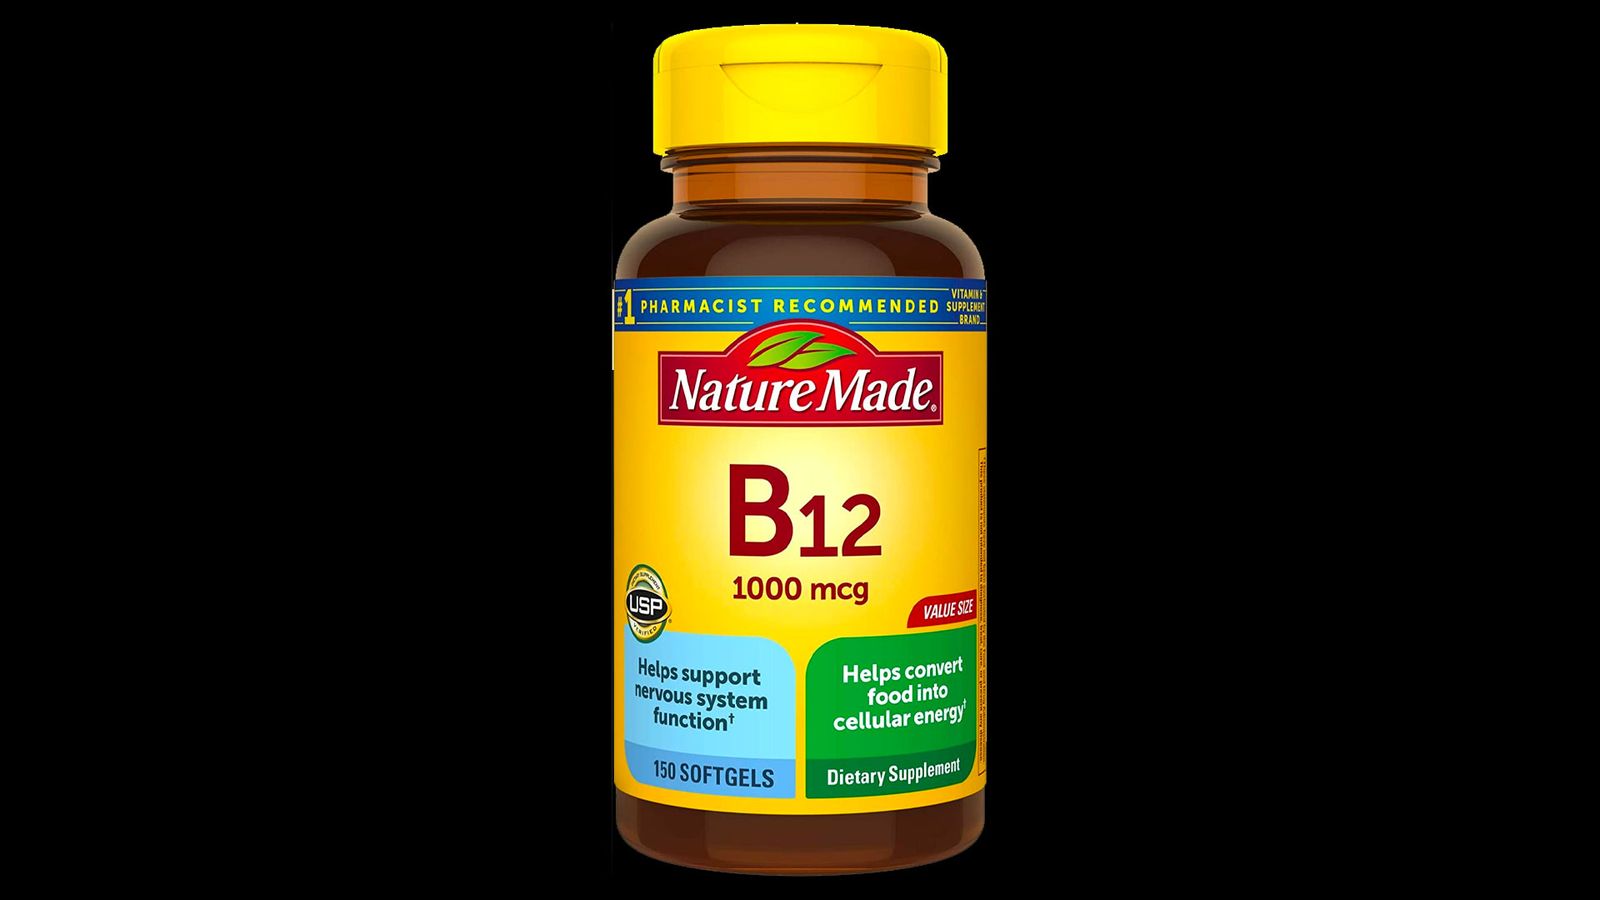 Nature Made Vitamin B12 product image of a brown container with yellow label and lid.